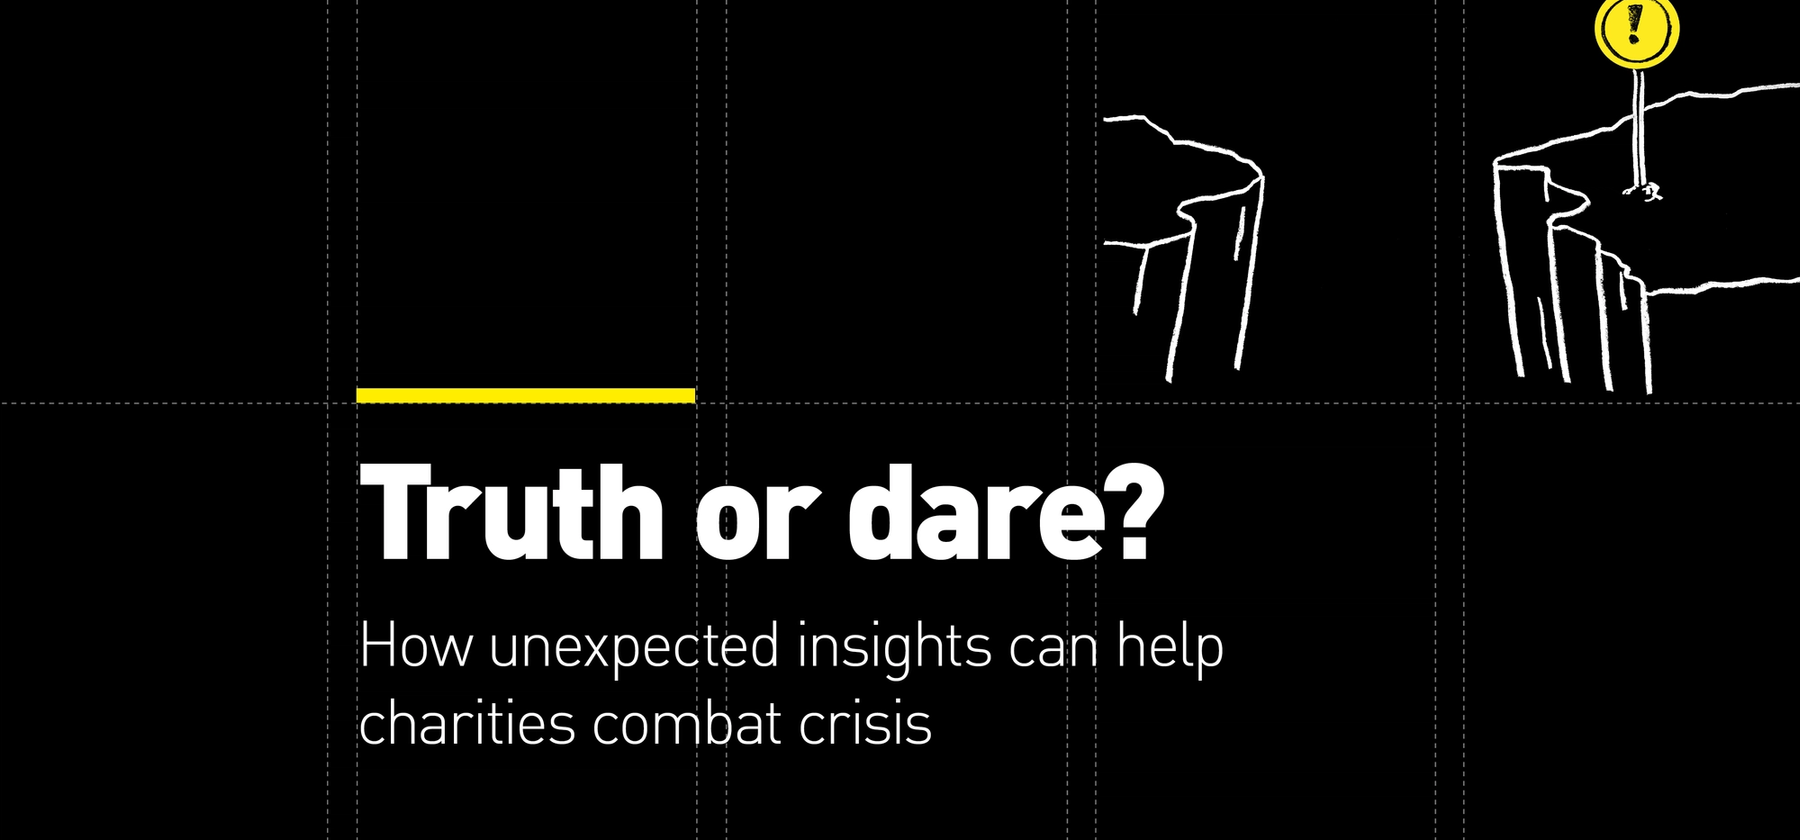 psLondon Whitepaper | Truth or dare? How unexpected marketing insights can help charities combat potential fundraising crisis.